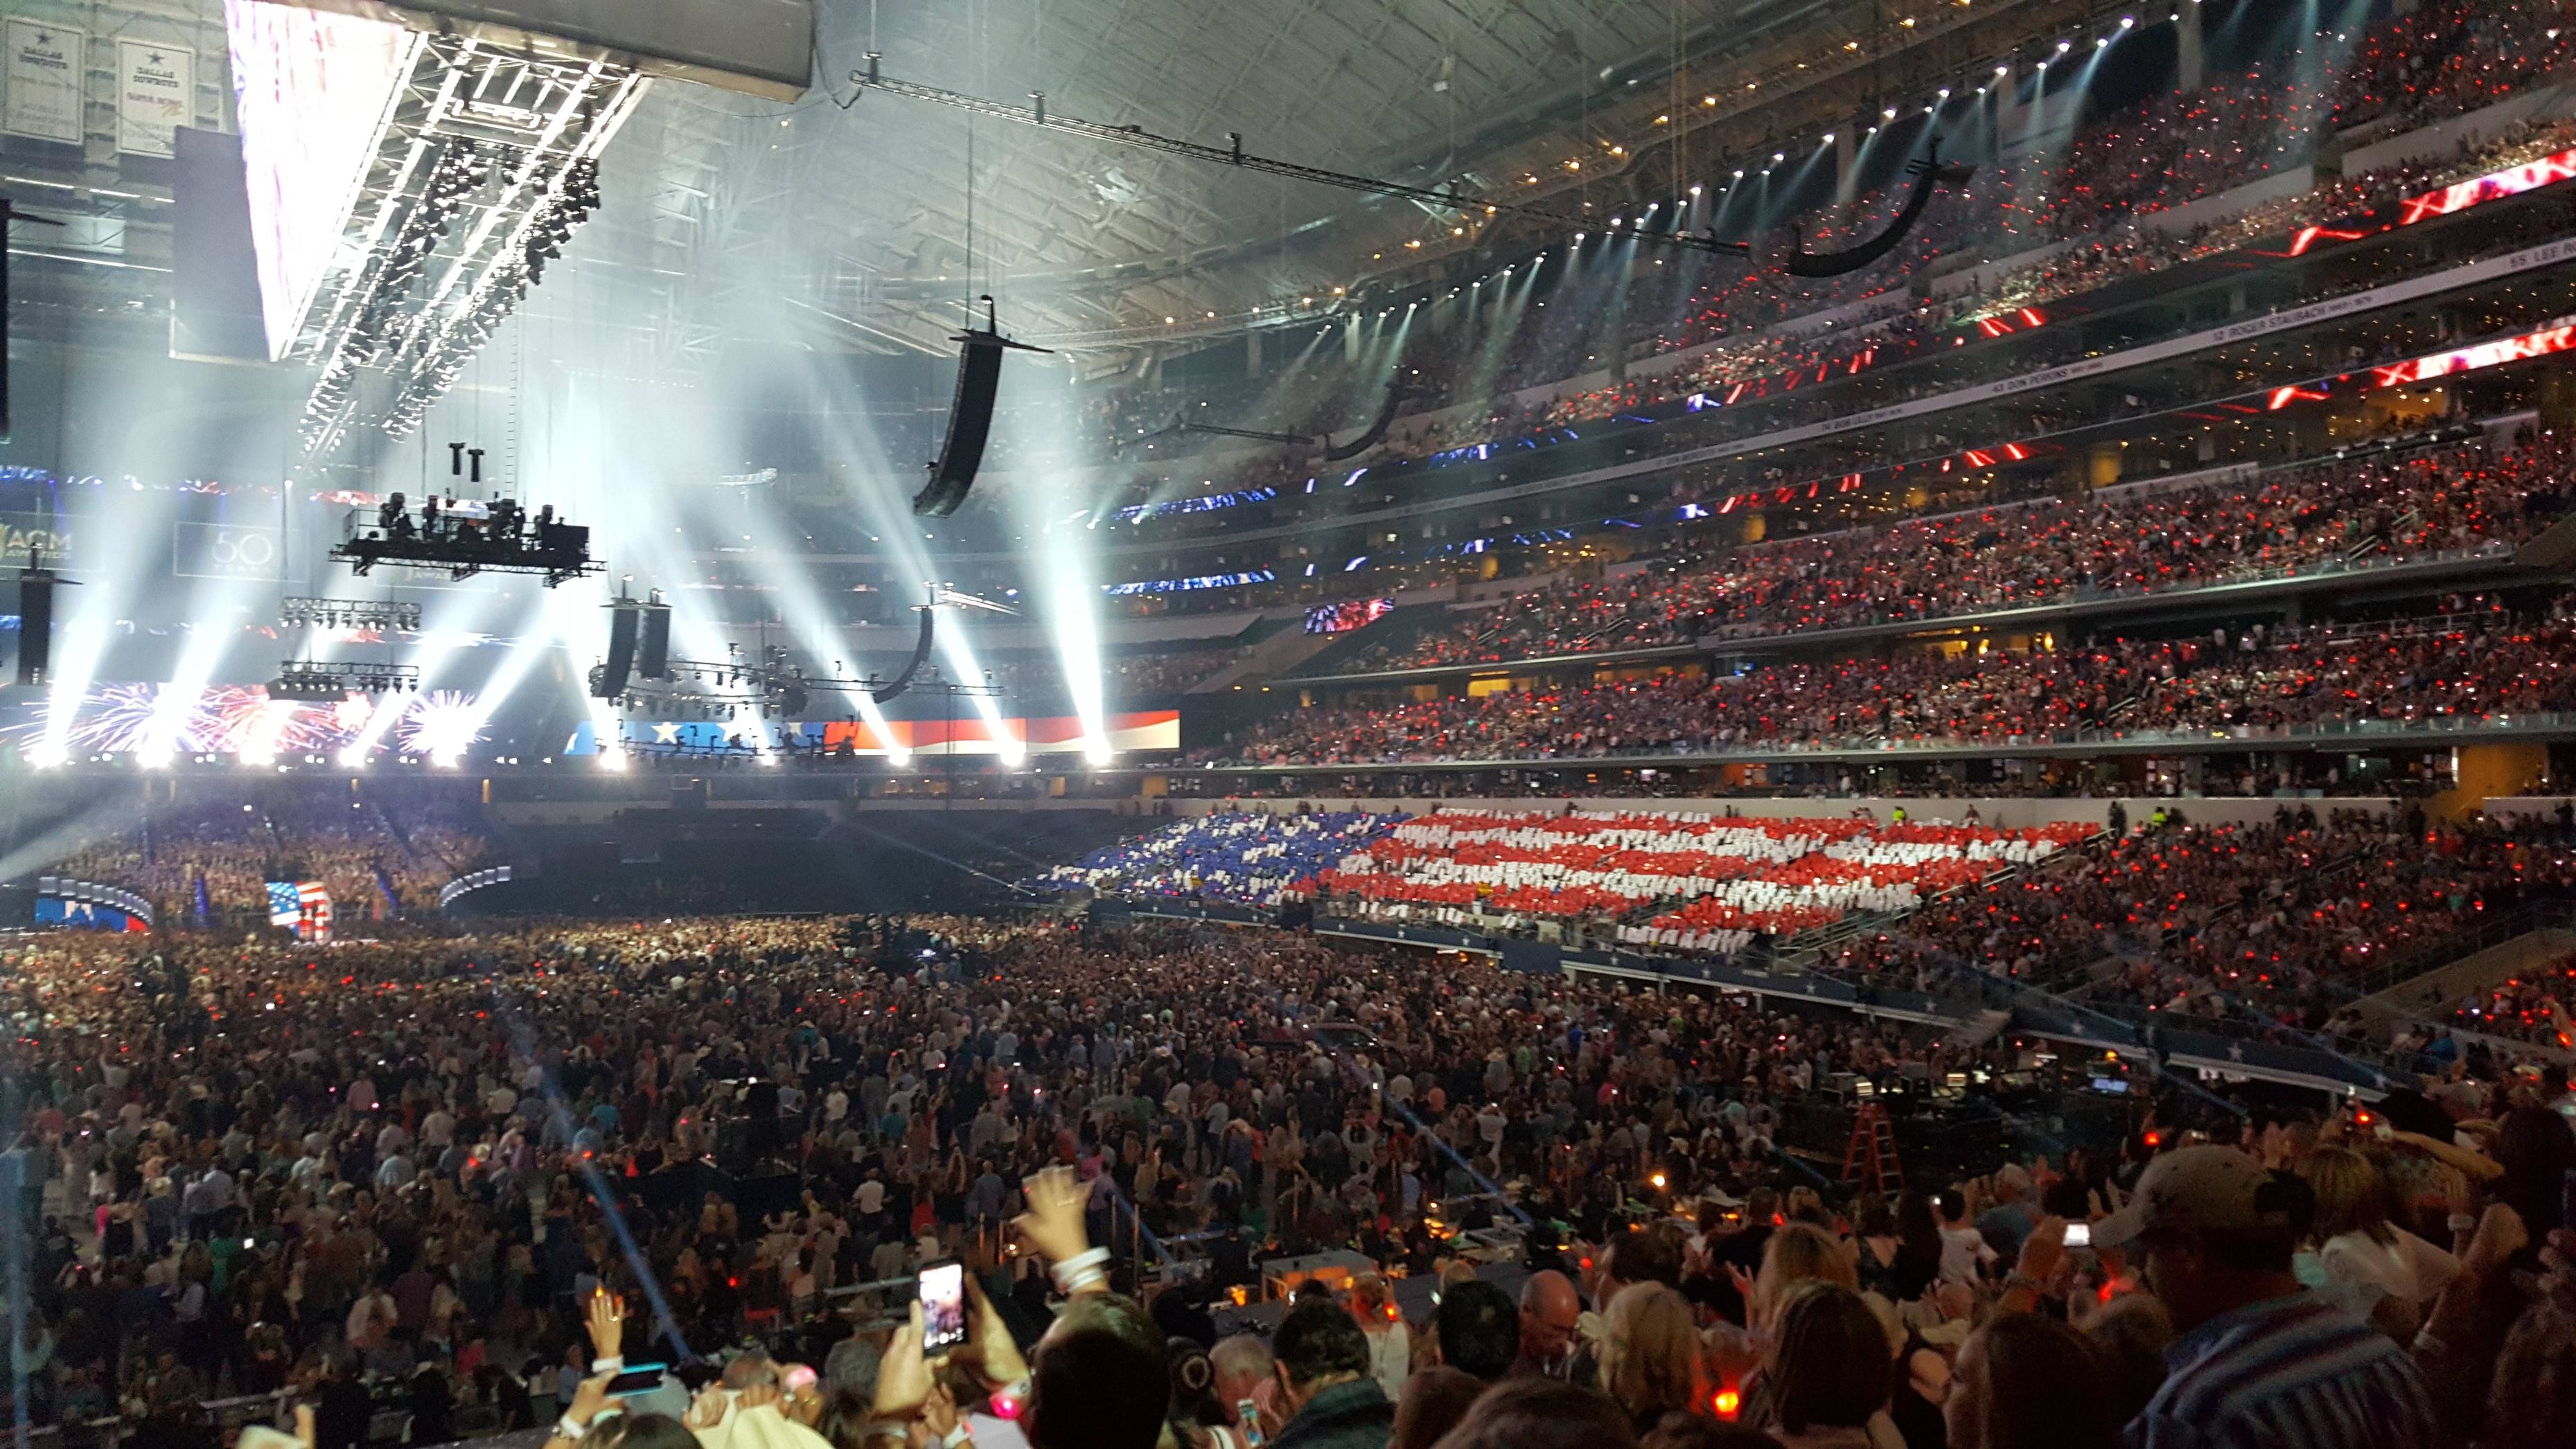 3718x2092 50th ACM Awards at AT&T Stadium. Camera handled itself pretty well  considering the challenging lighting environment.